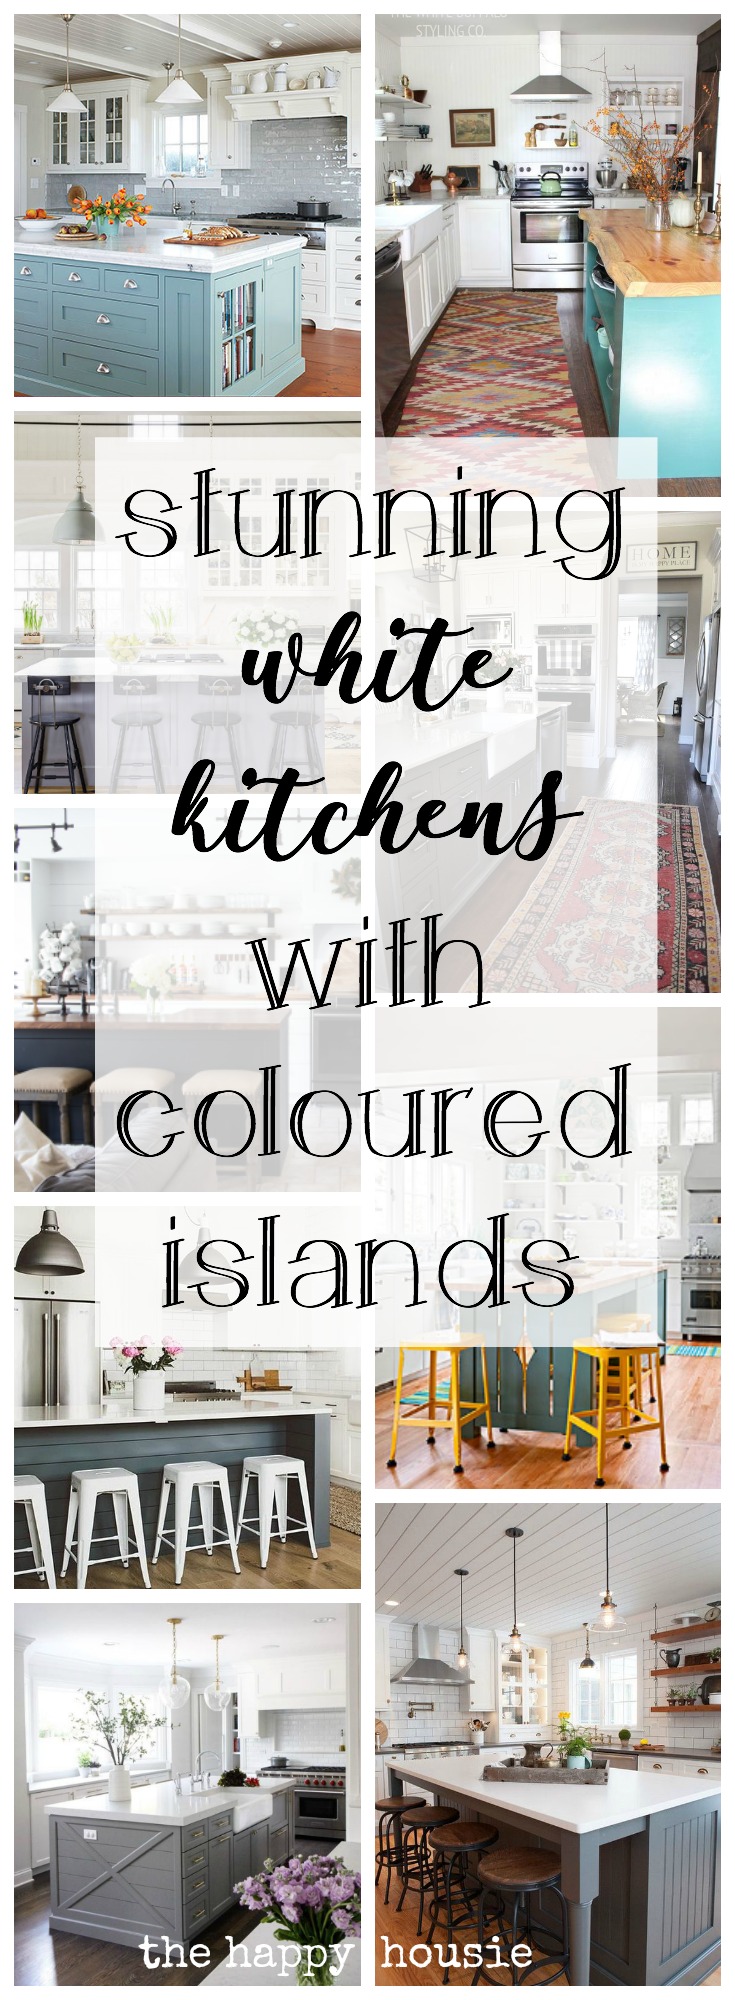 Stunning white kitchens with coloured islands graphic.